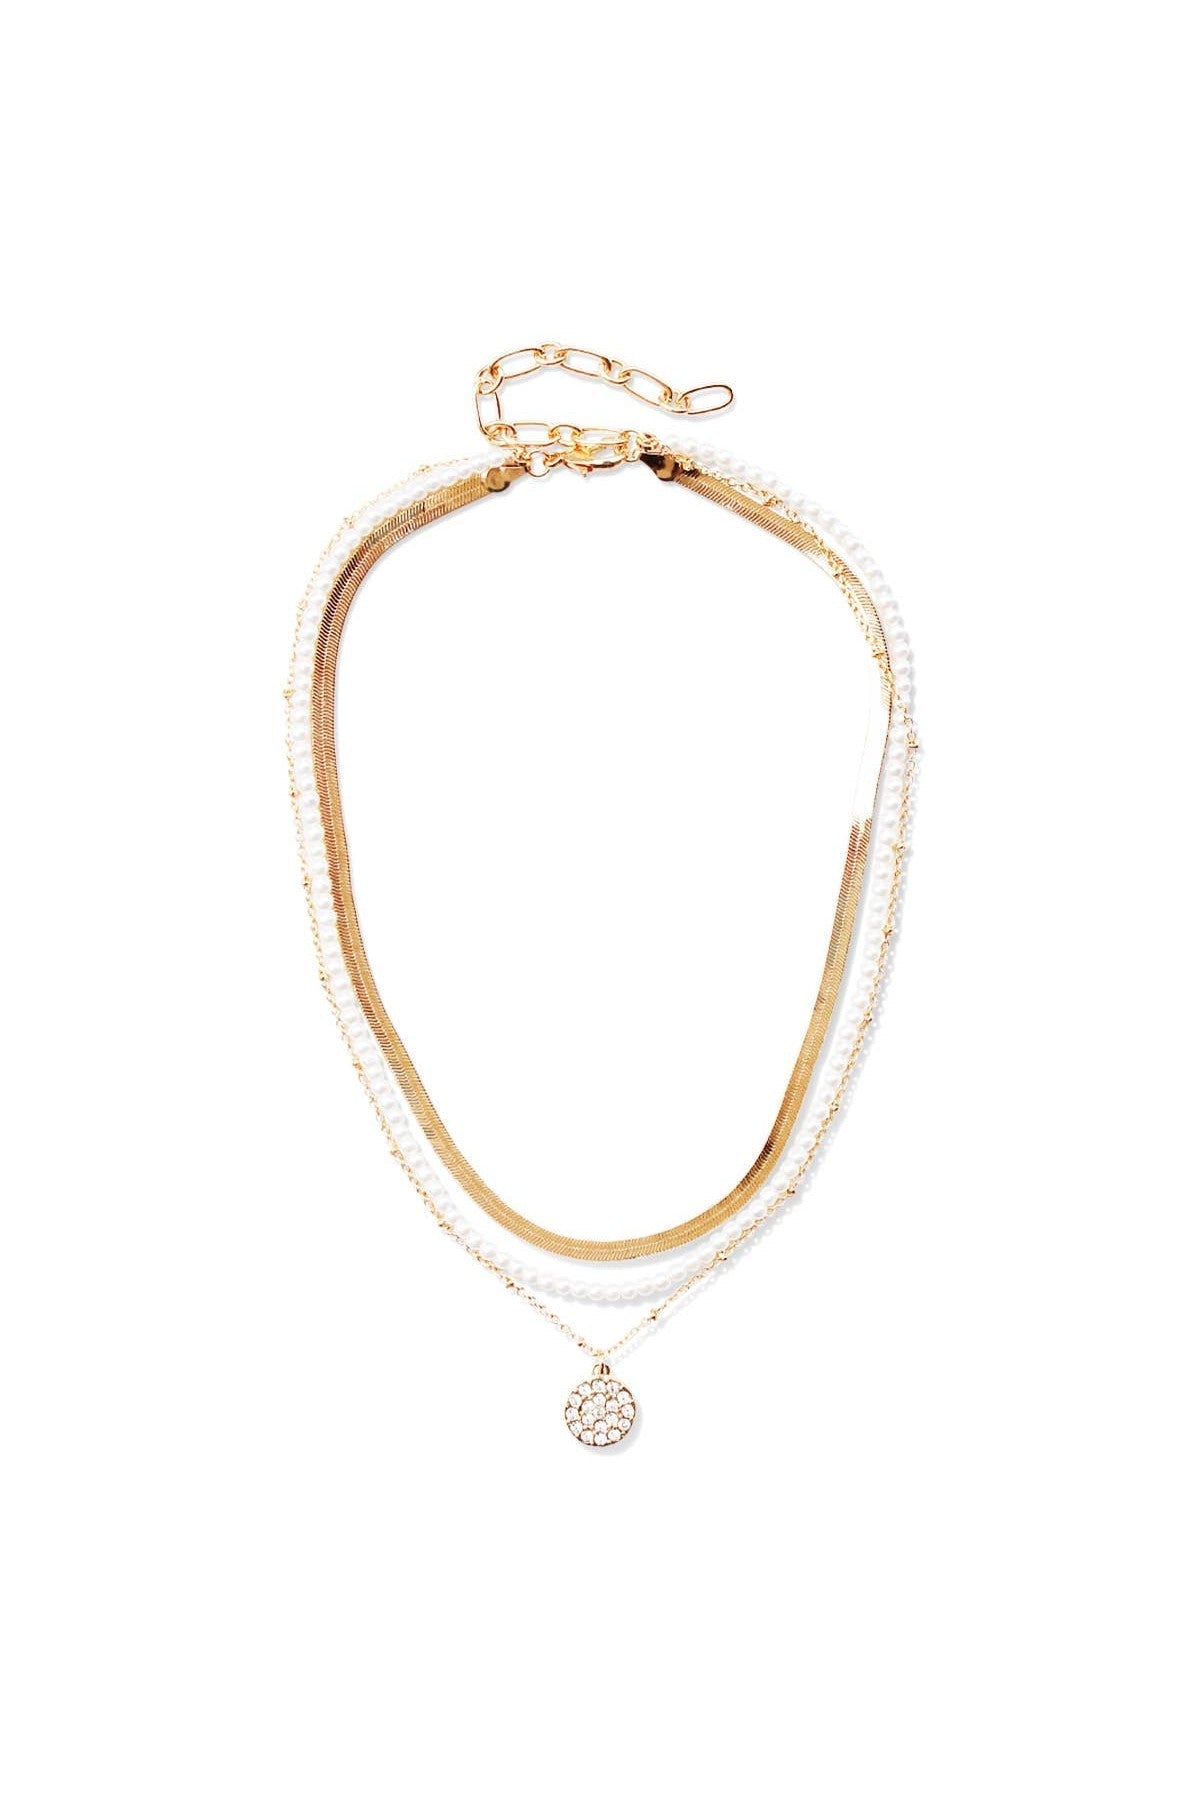 Pearl & Chain Layered Necklace-Jewelry-Viv&Lou-Revive Boutique